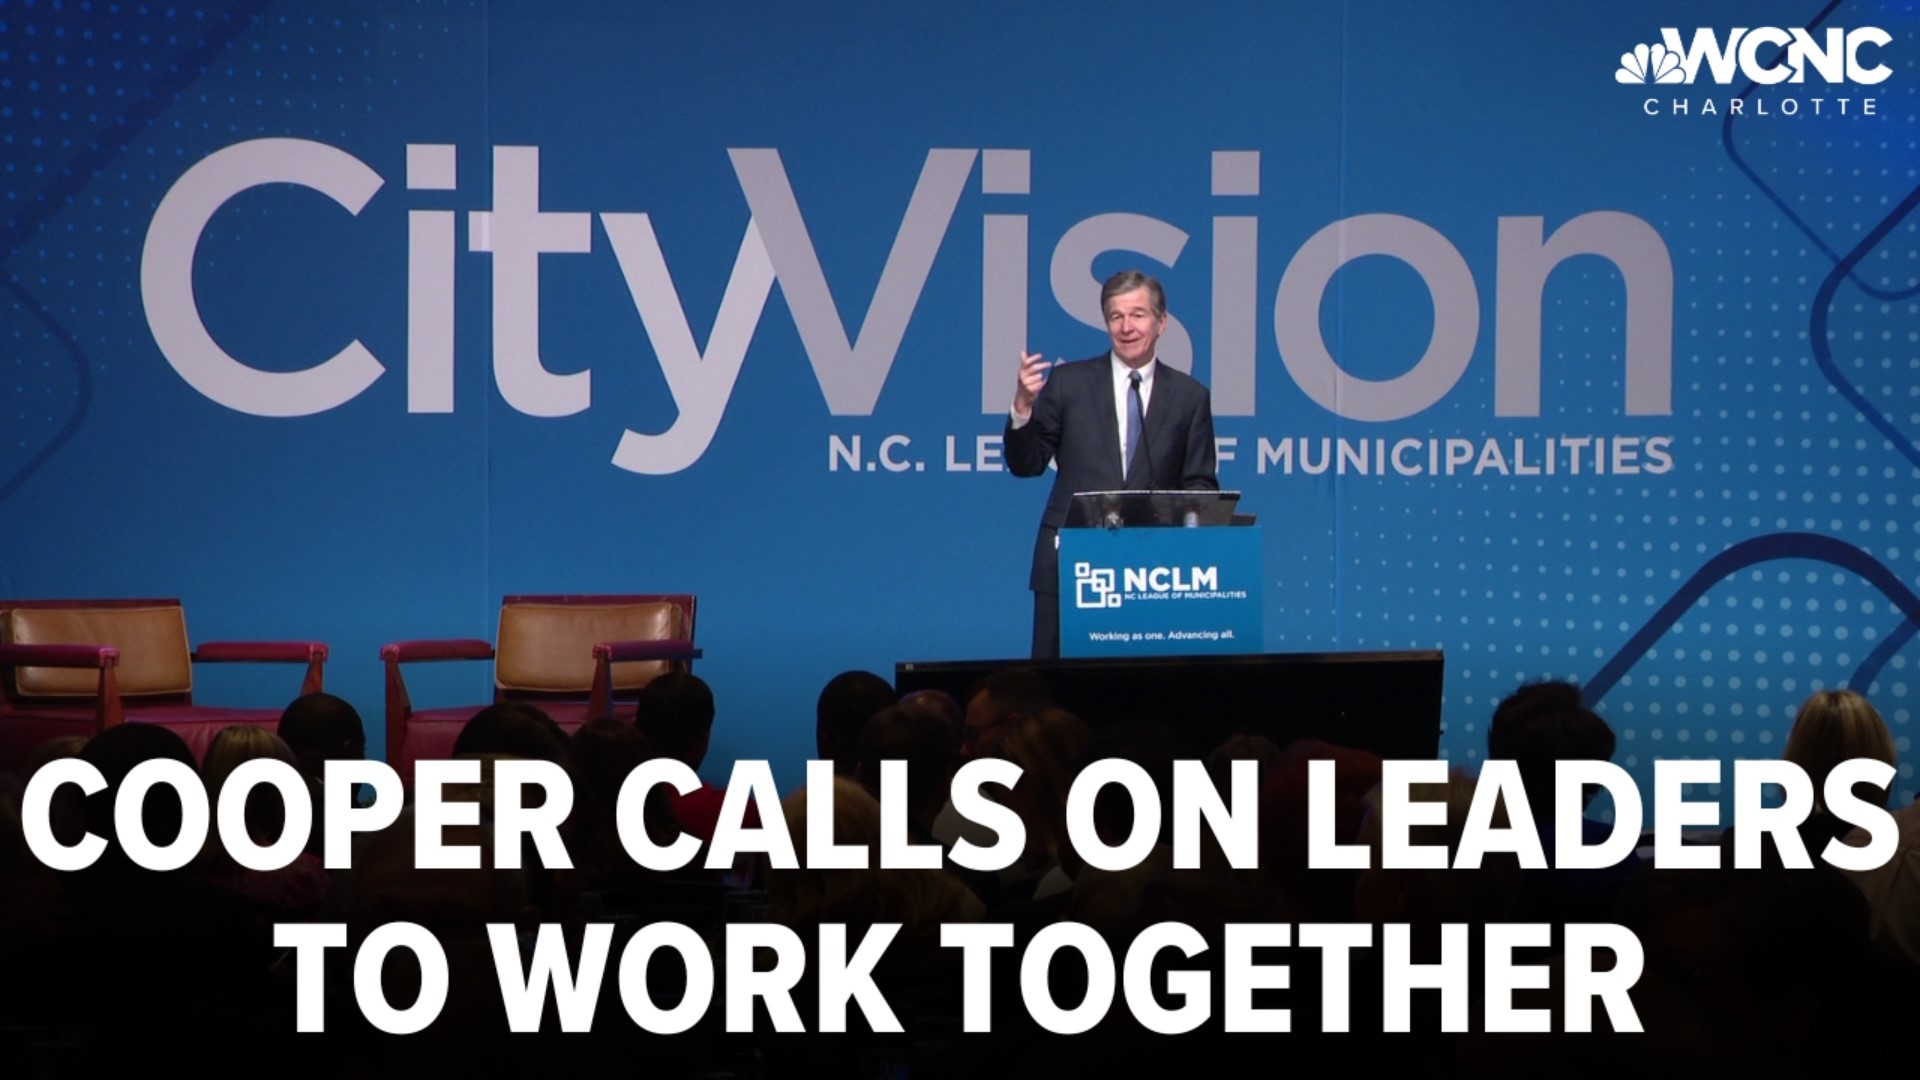 The North Carolina League of Municipalities brought its annual CityVision conference to Concord this week.